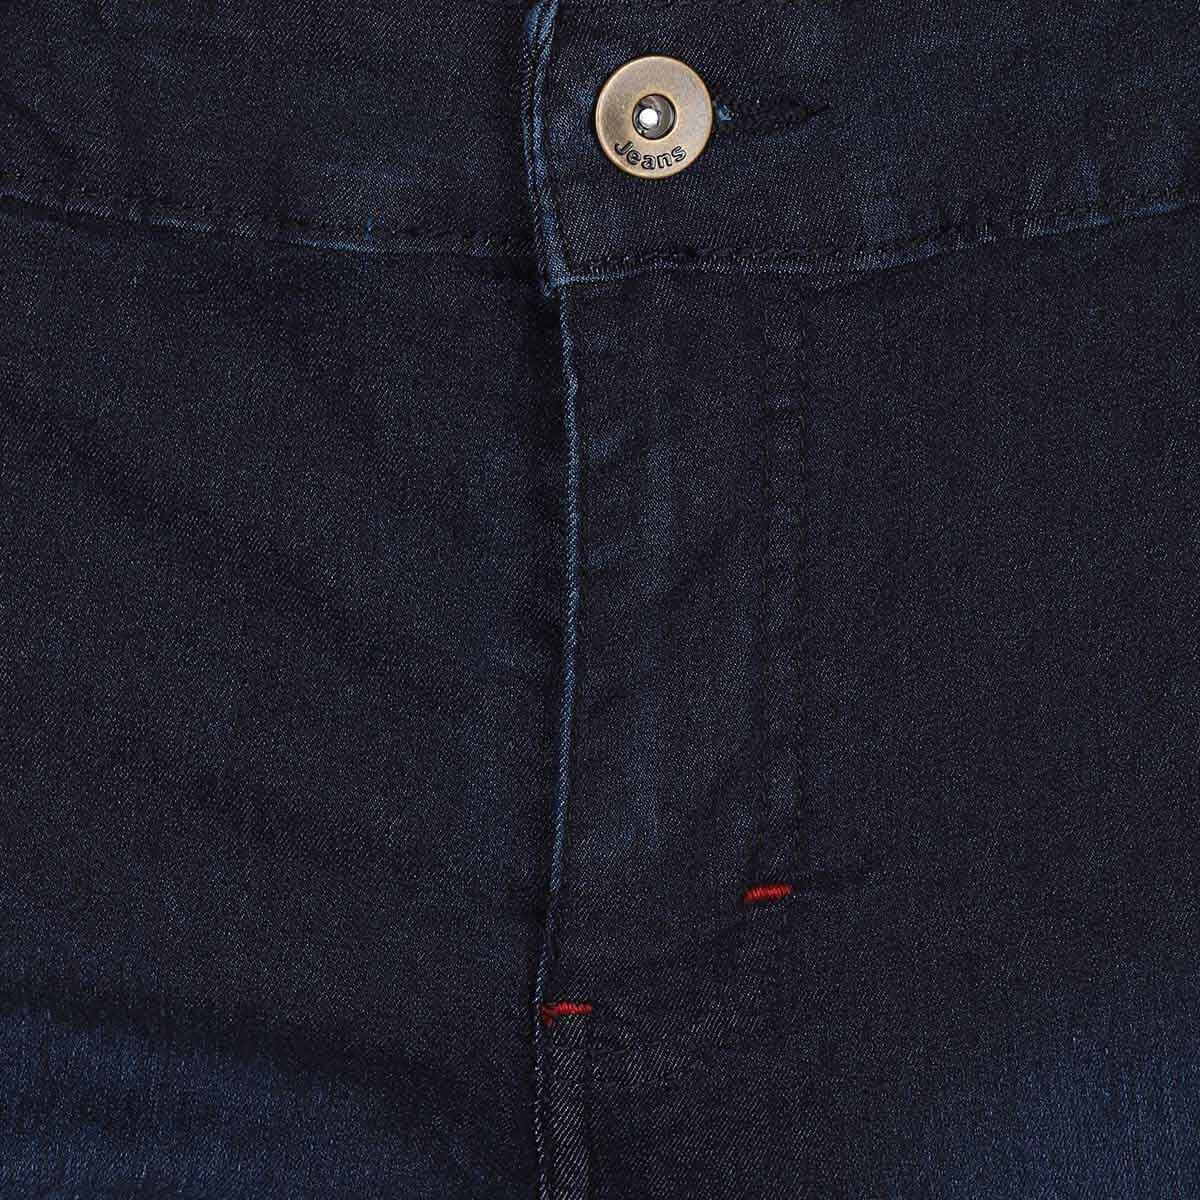 Jeans Slim Fit Azul Obscuro para Caballero Y&ouml;ngster Modelo 30191Kky